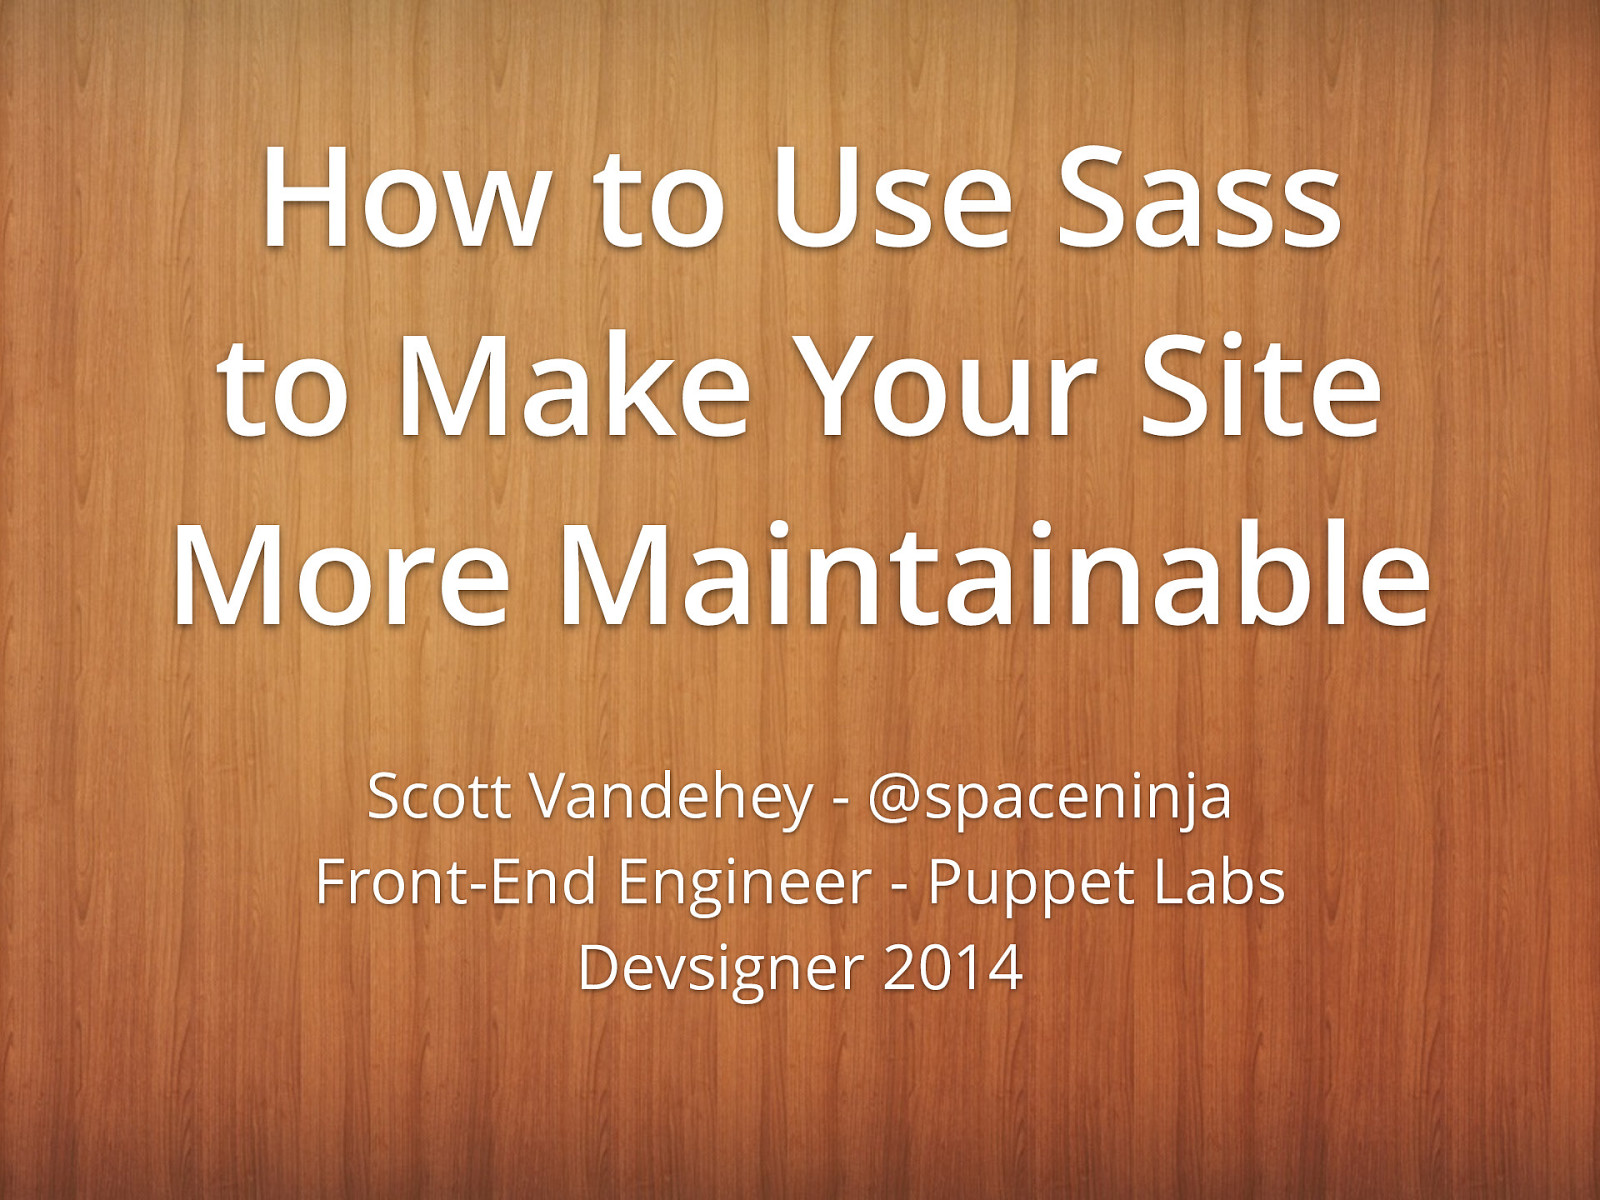 How to Use Sass to Make Your Site More Maintainable